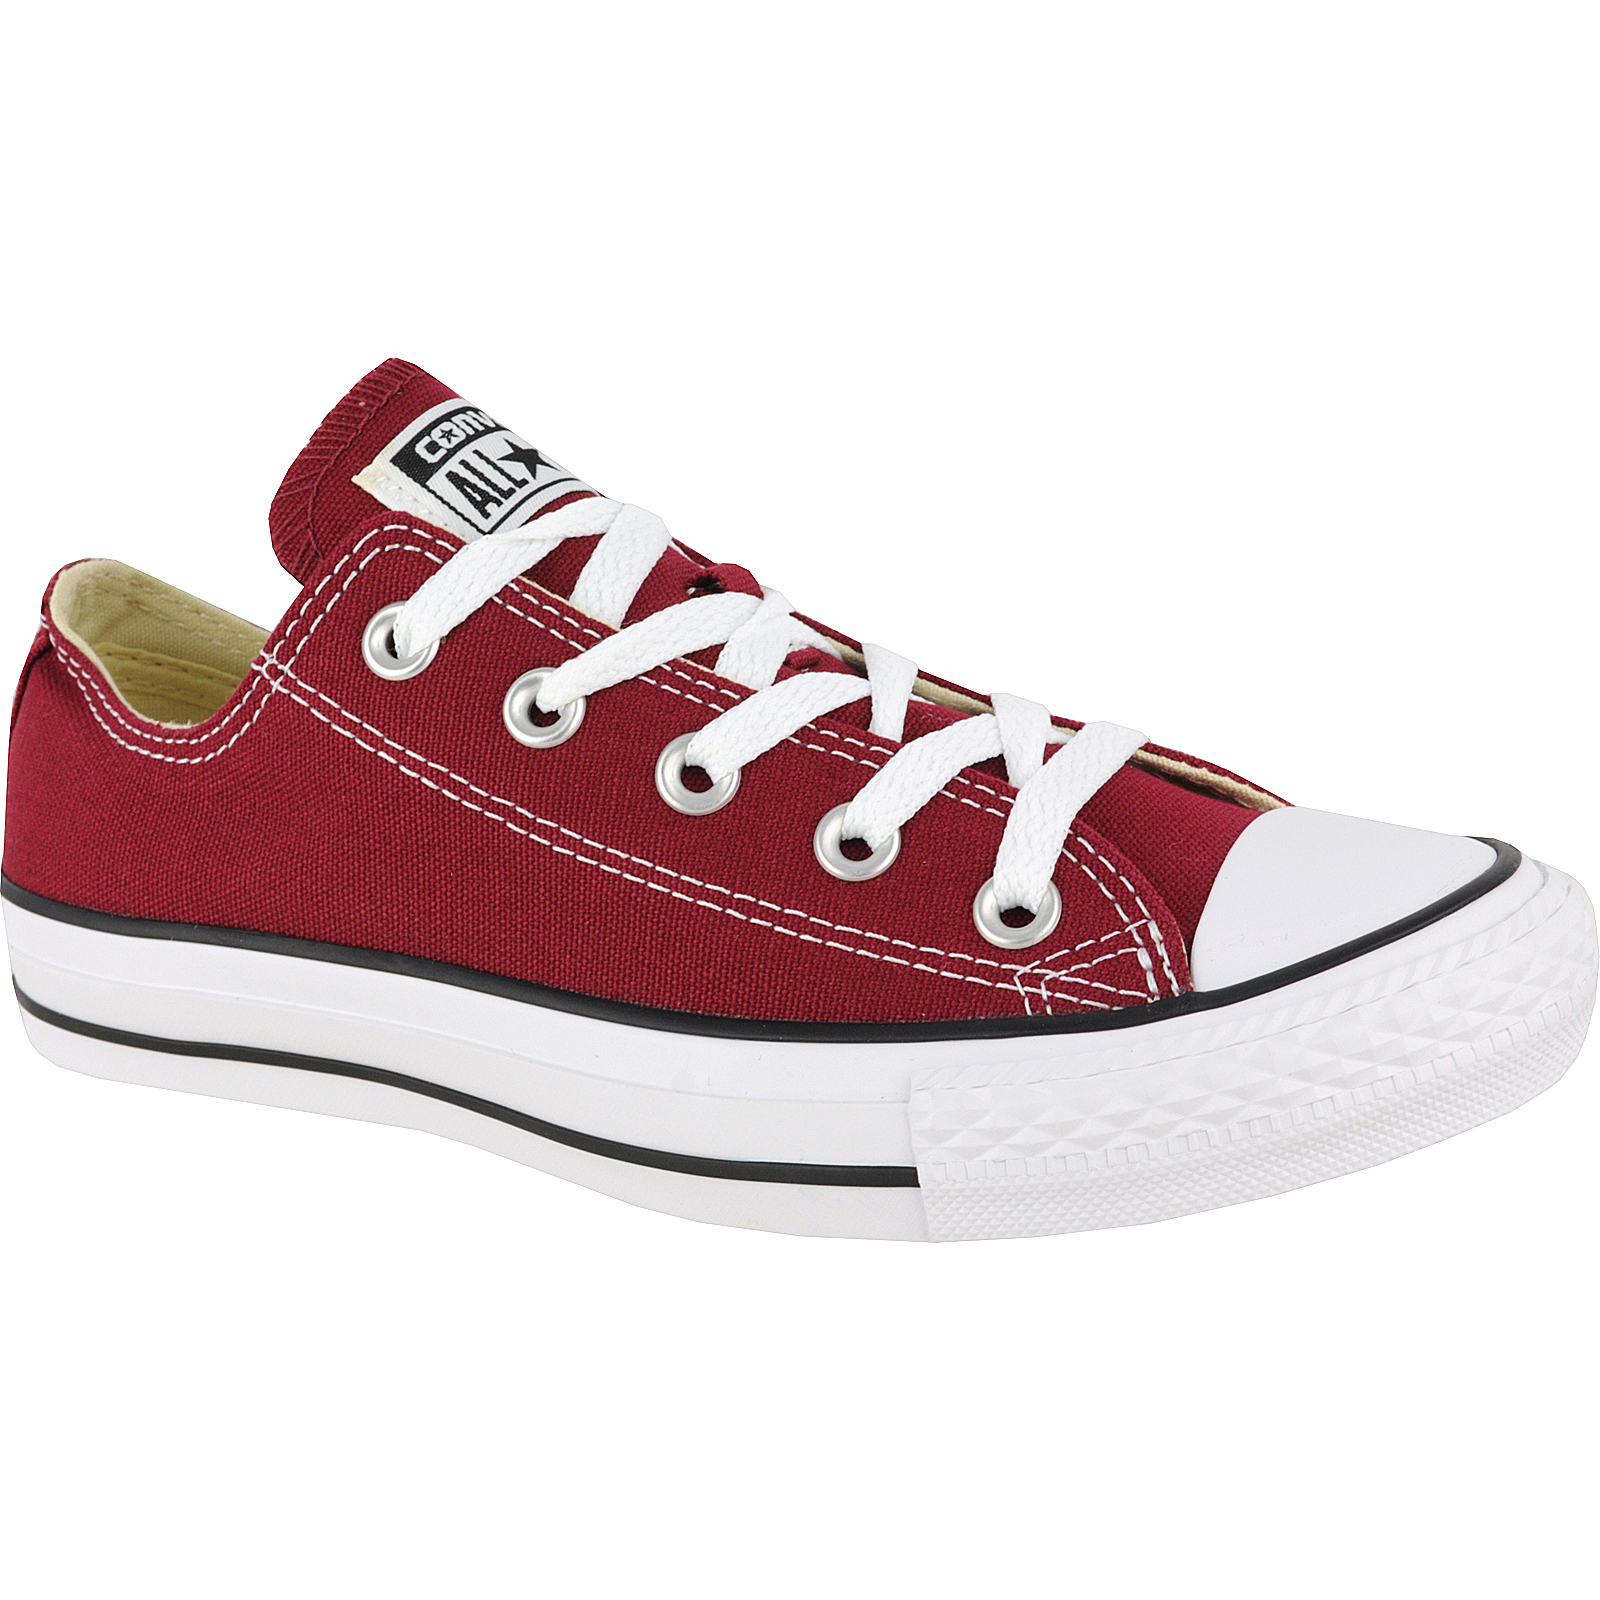 Bother once again coal Tenisi, Sneakers unisex Converse Chuck Taylor All Star Ox M9691C